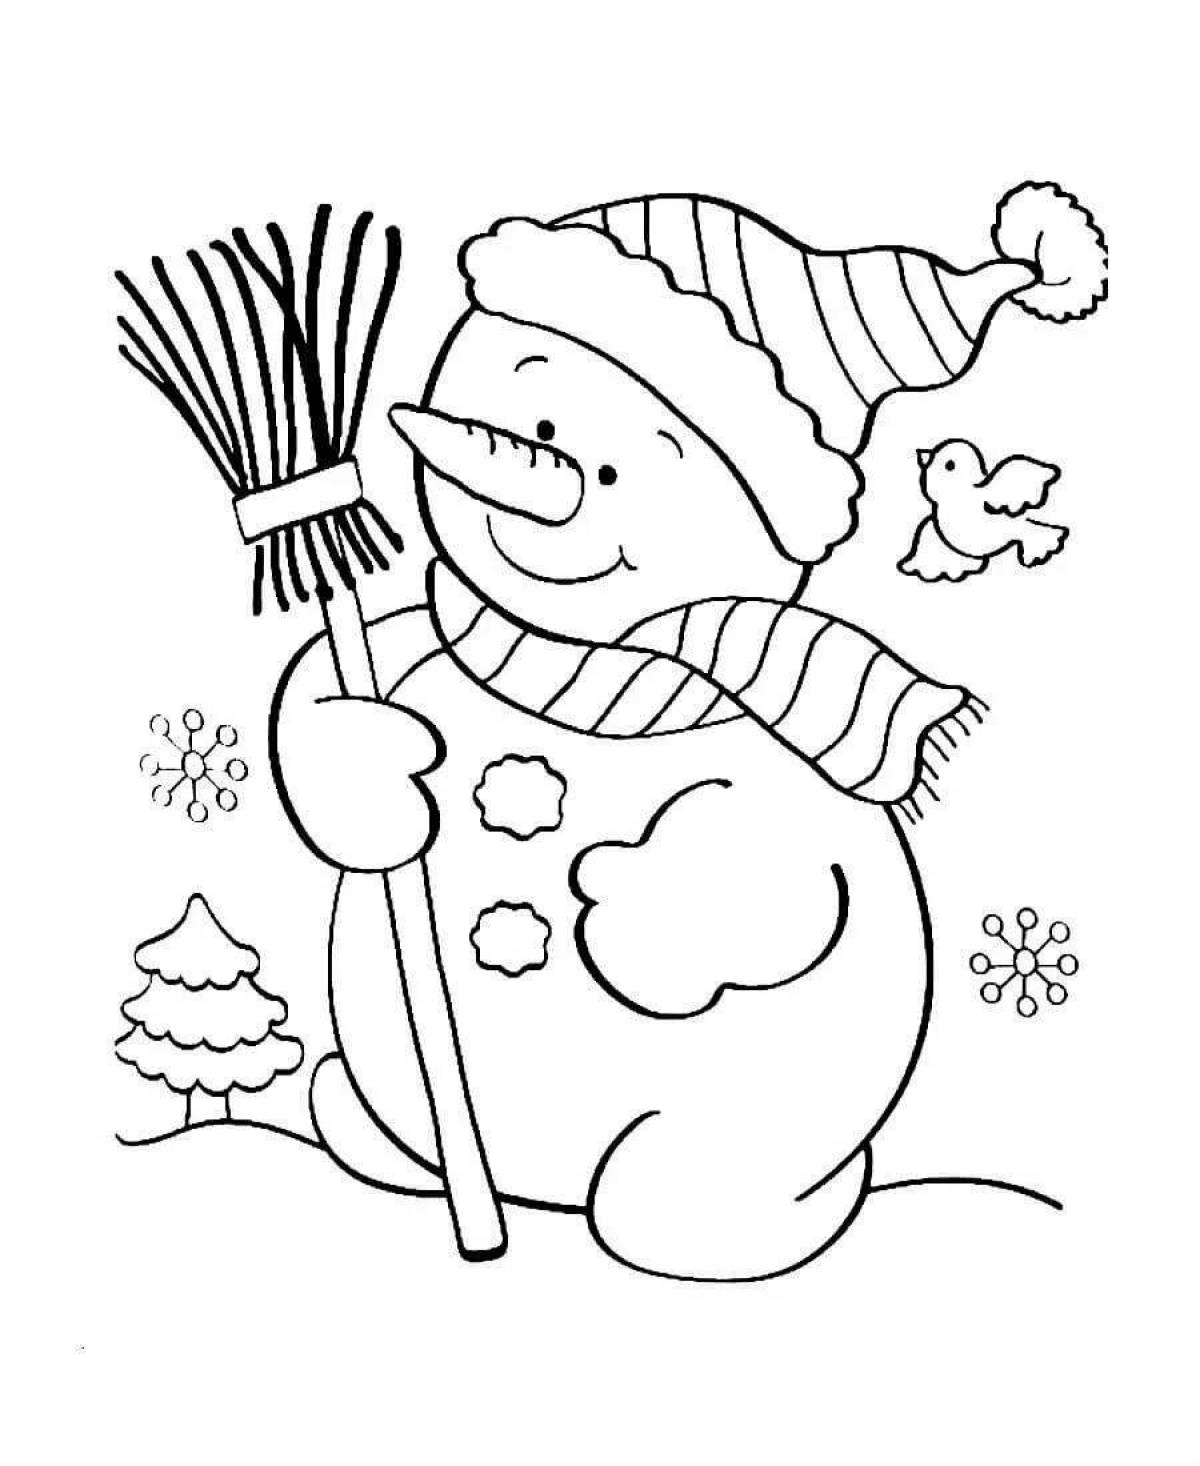 Awesome snowman coloring page